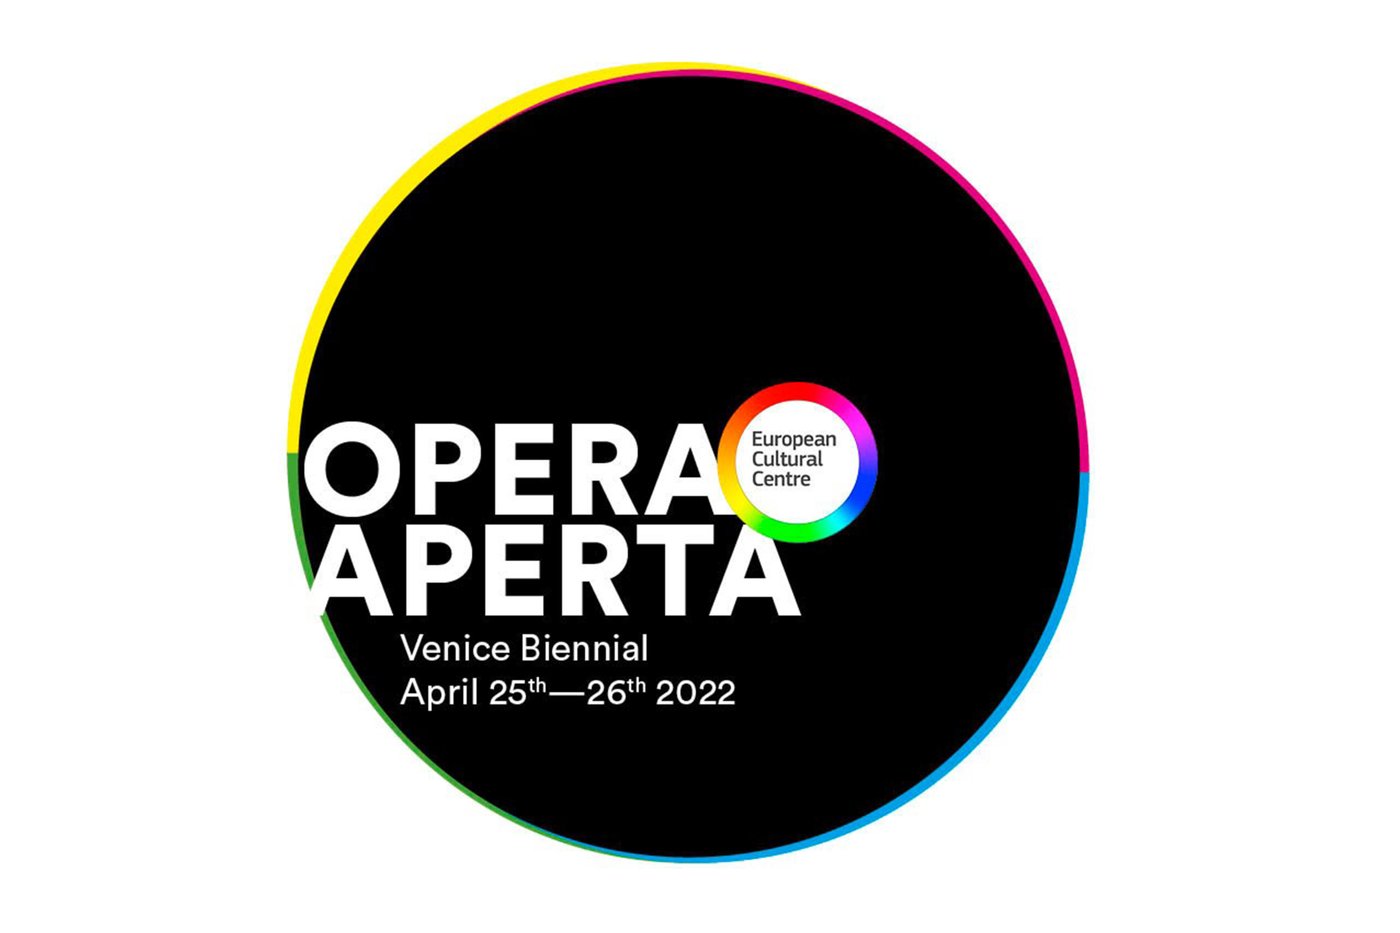 Logo of the event "opera aperta", black circle with white writing, bordered with colorful lines